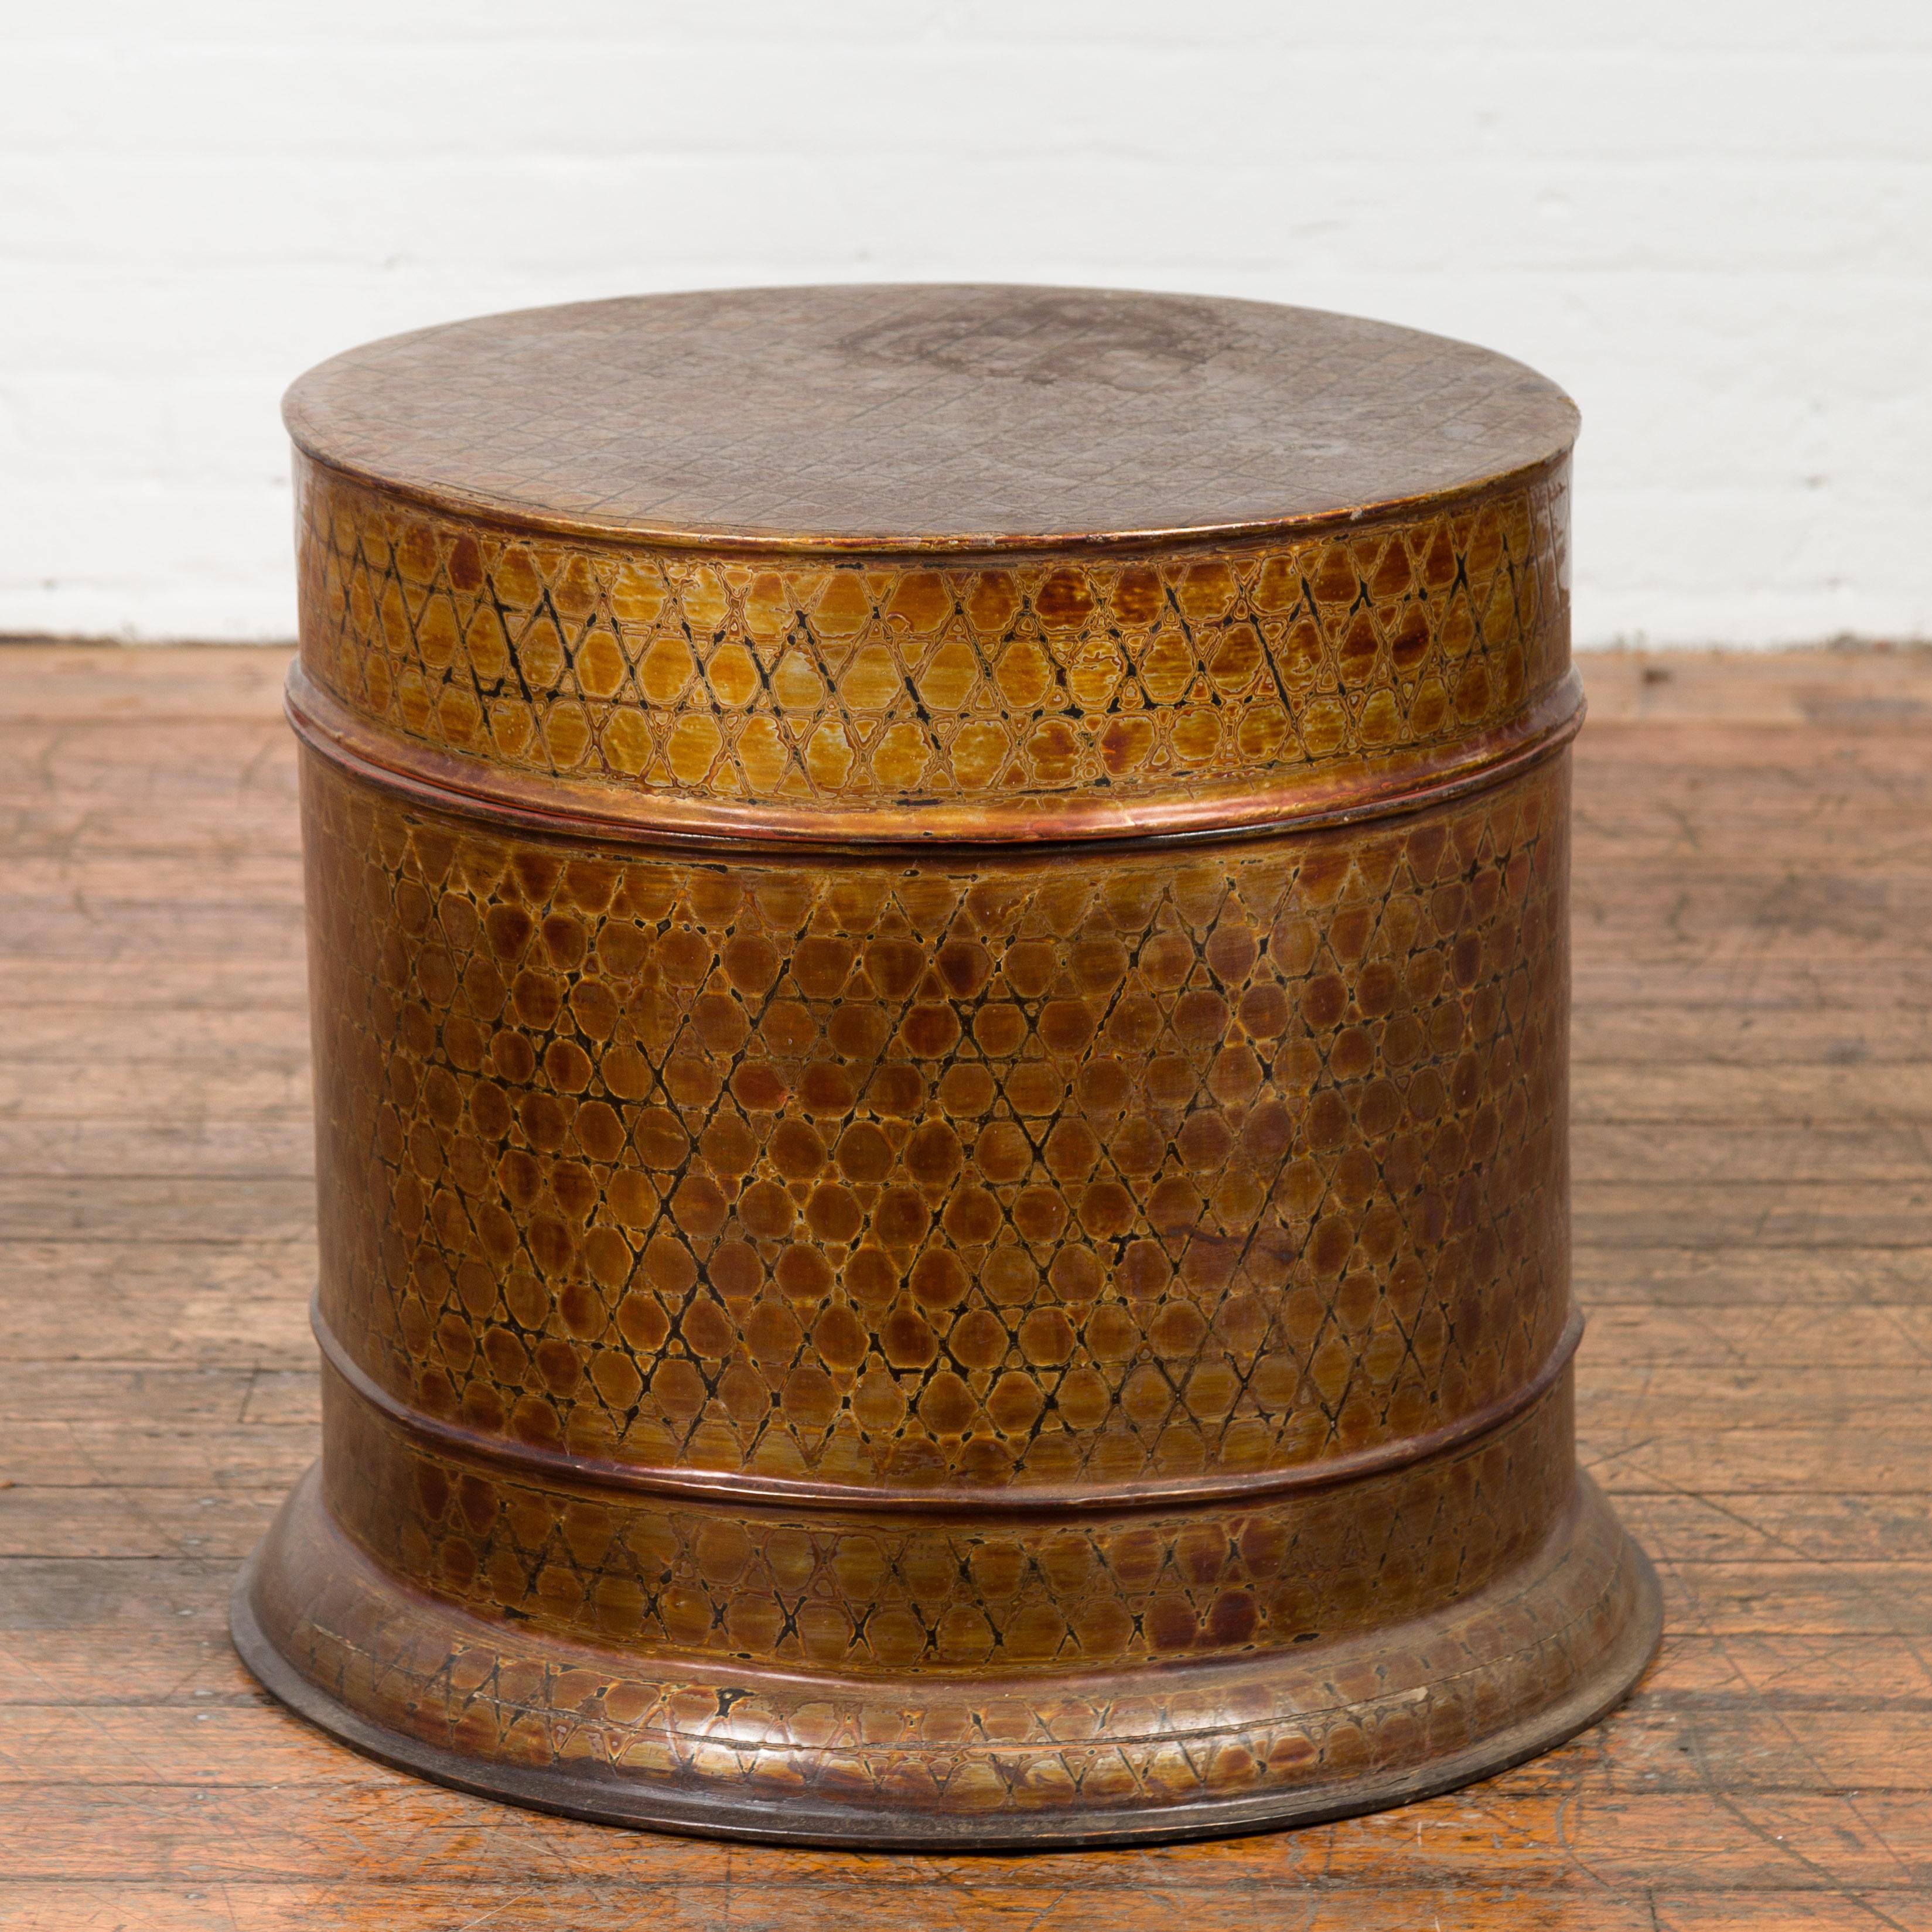 A vintage Burmese negora lacquer round box from the mid-20th century, with snake skin pattern. Created in Burma during the 20th century, this large decorative box features a negora lacquered body resting on a circular base. Showcasing red lacquer on